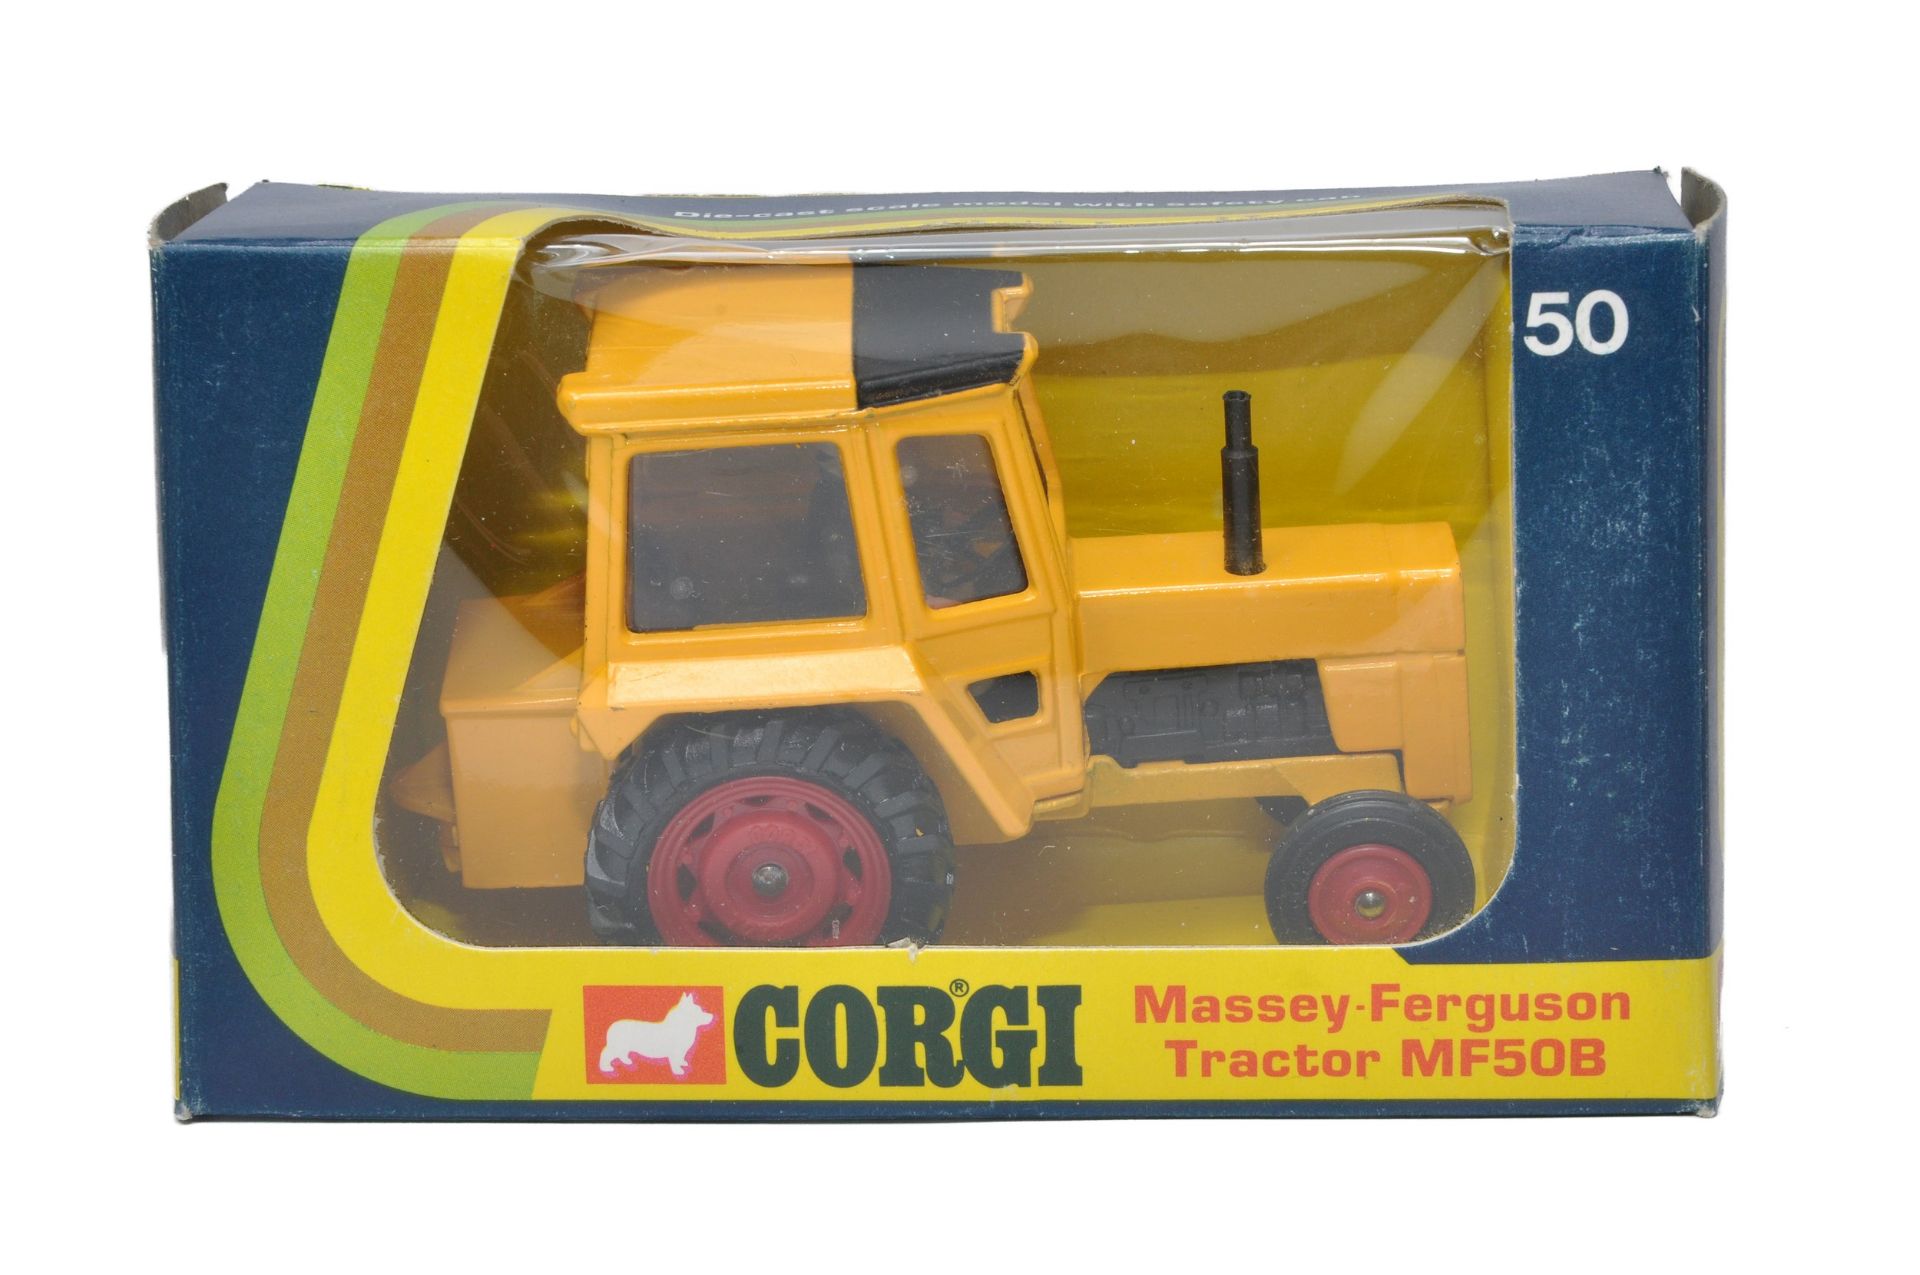 Corgi No. 50 Massey Ferguson 50B Tractor. Excellent in very good to excellent box.